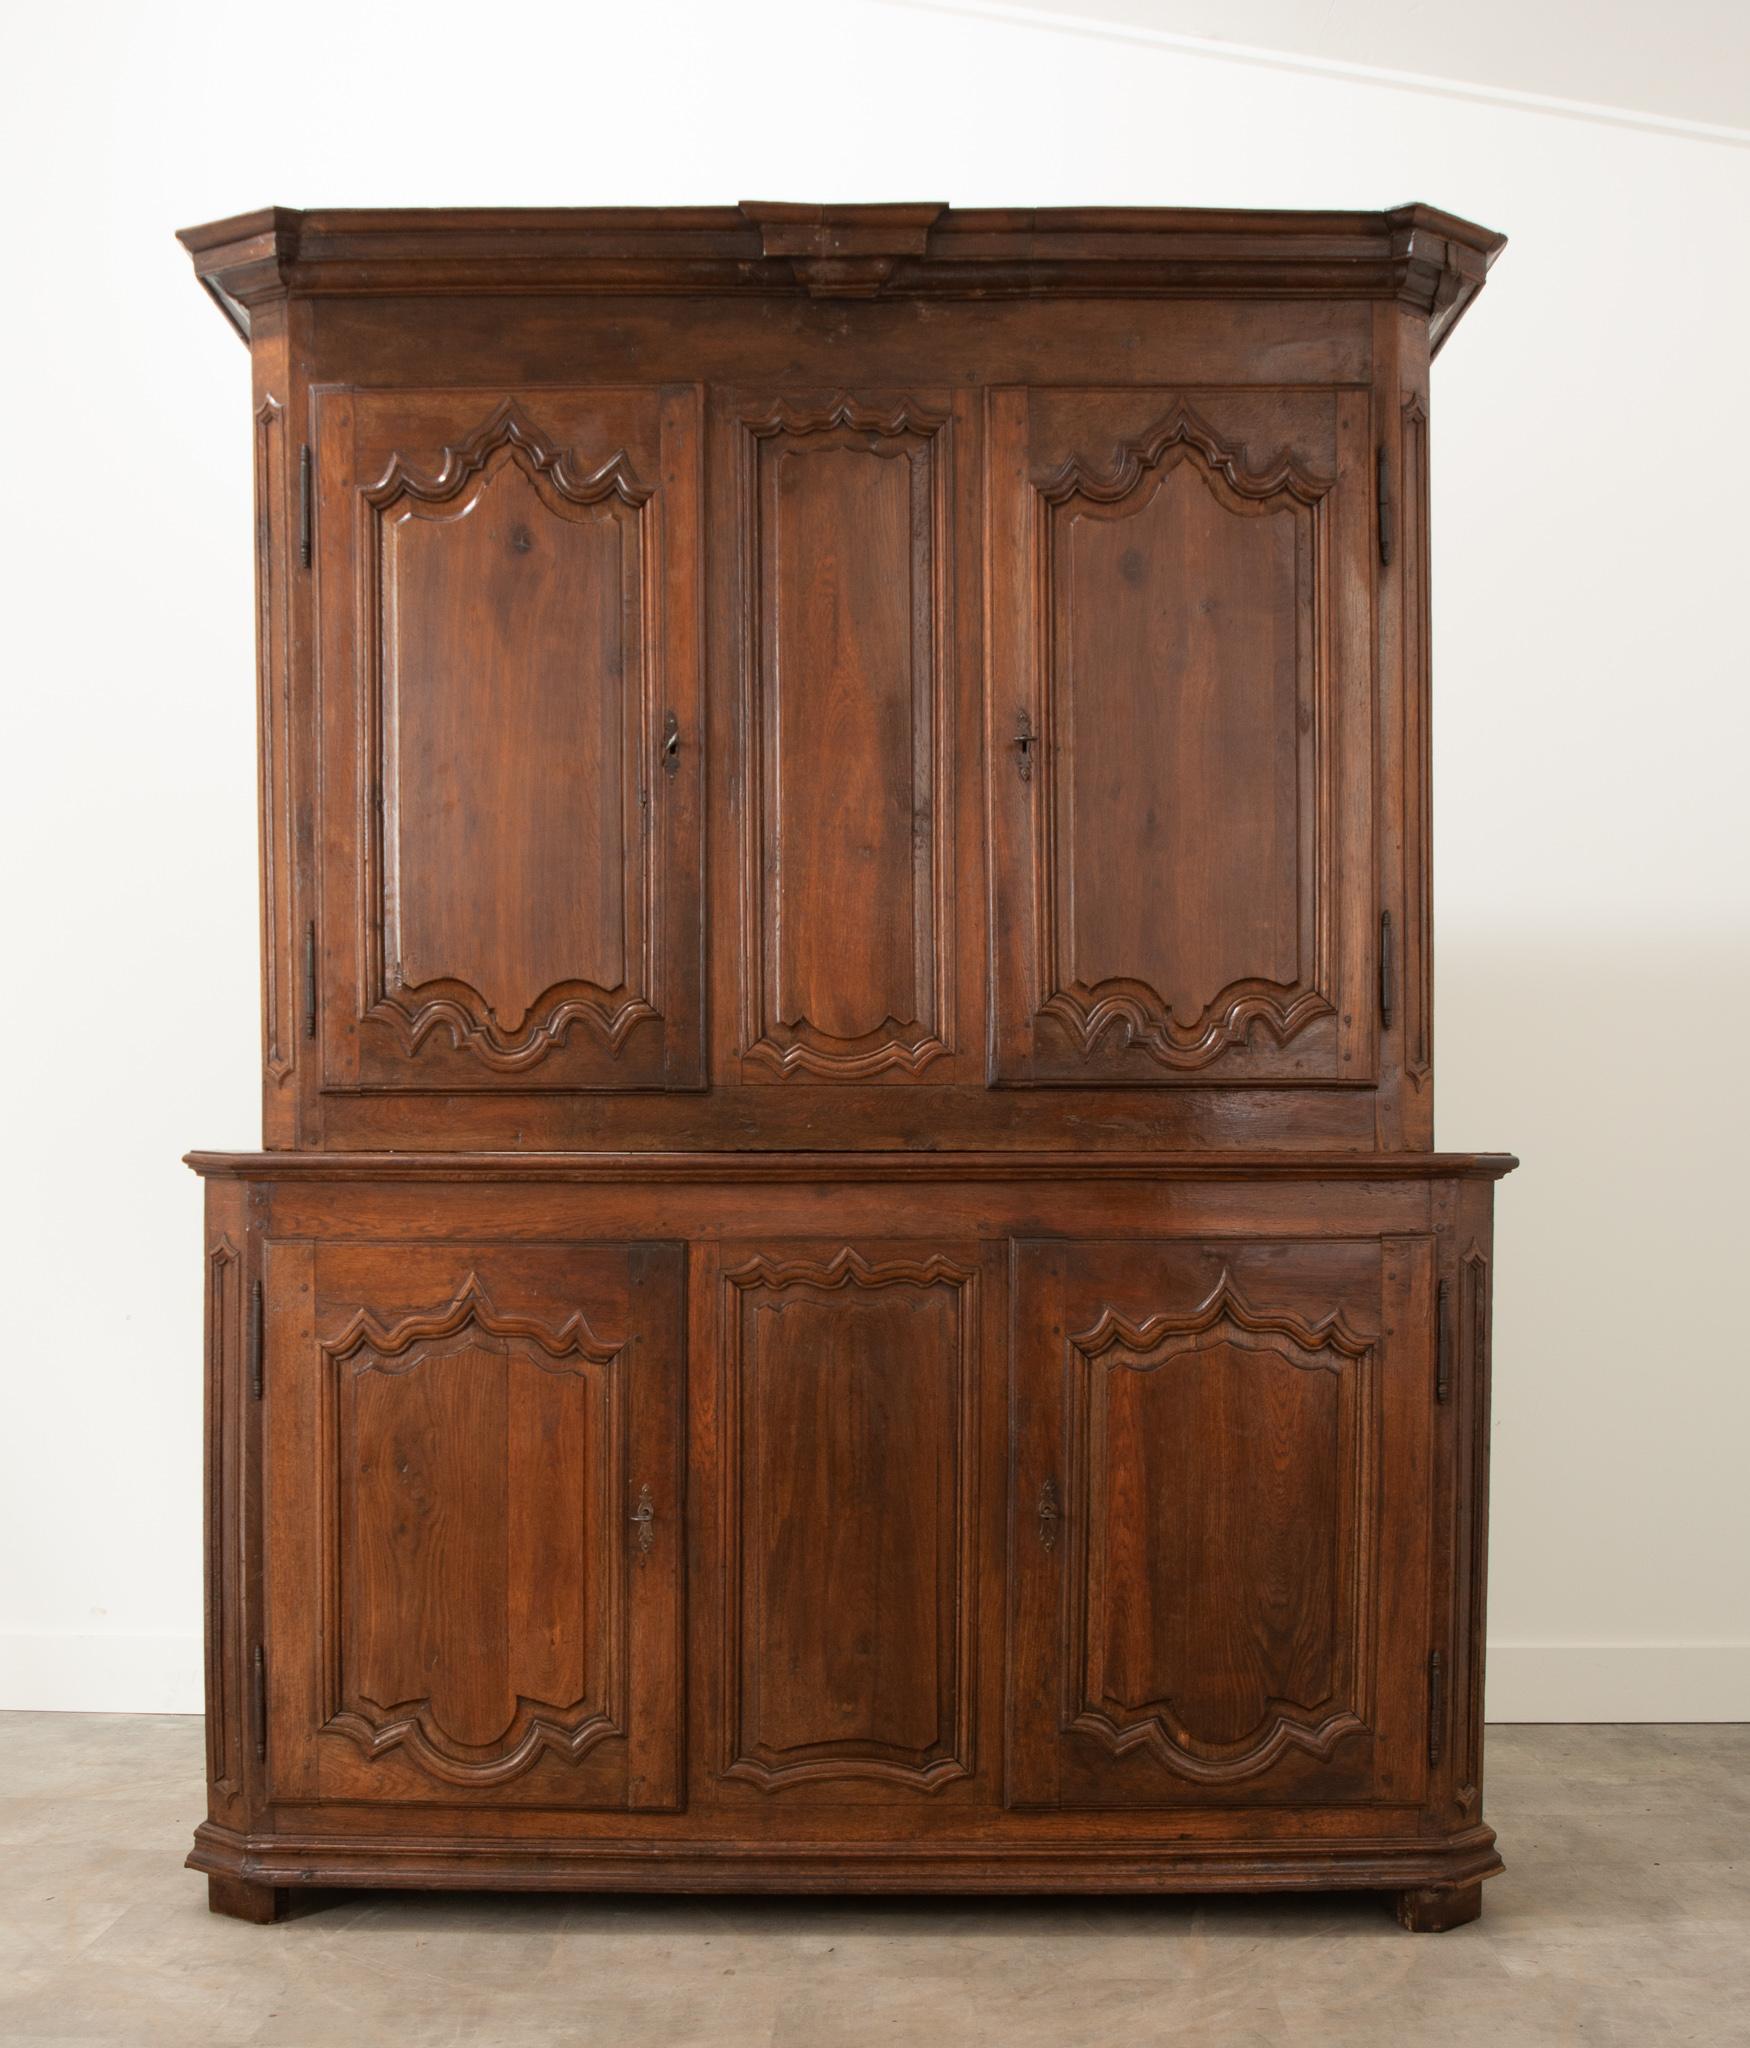 An impressive and substantial solid oak buffet a’ deux corps with Provincial charm from early 19th century France. This four door case antique is split into two bodies: a larger lower body and a smaller upper body. The upper is crowned with an